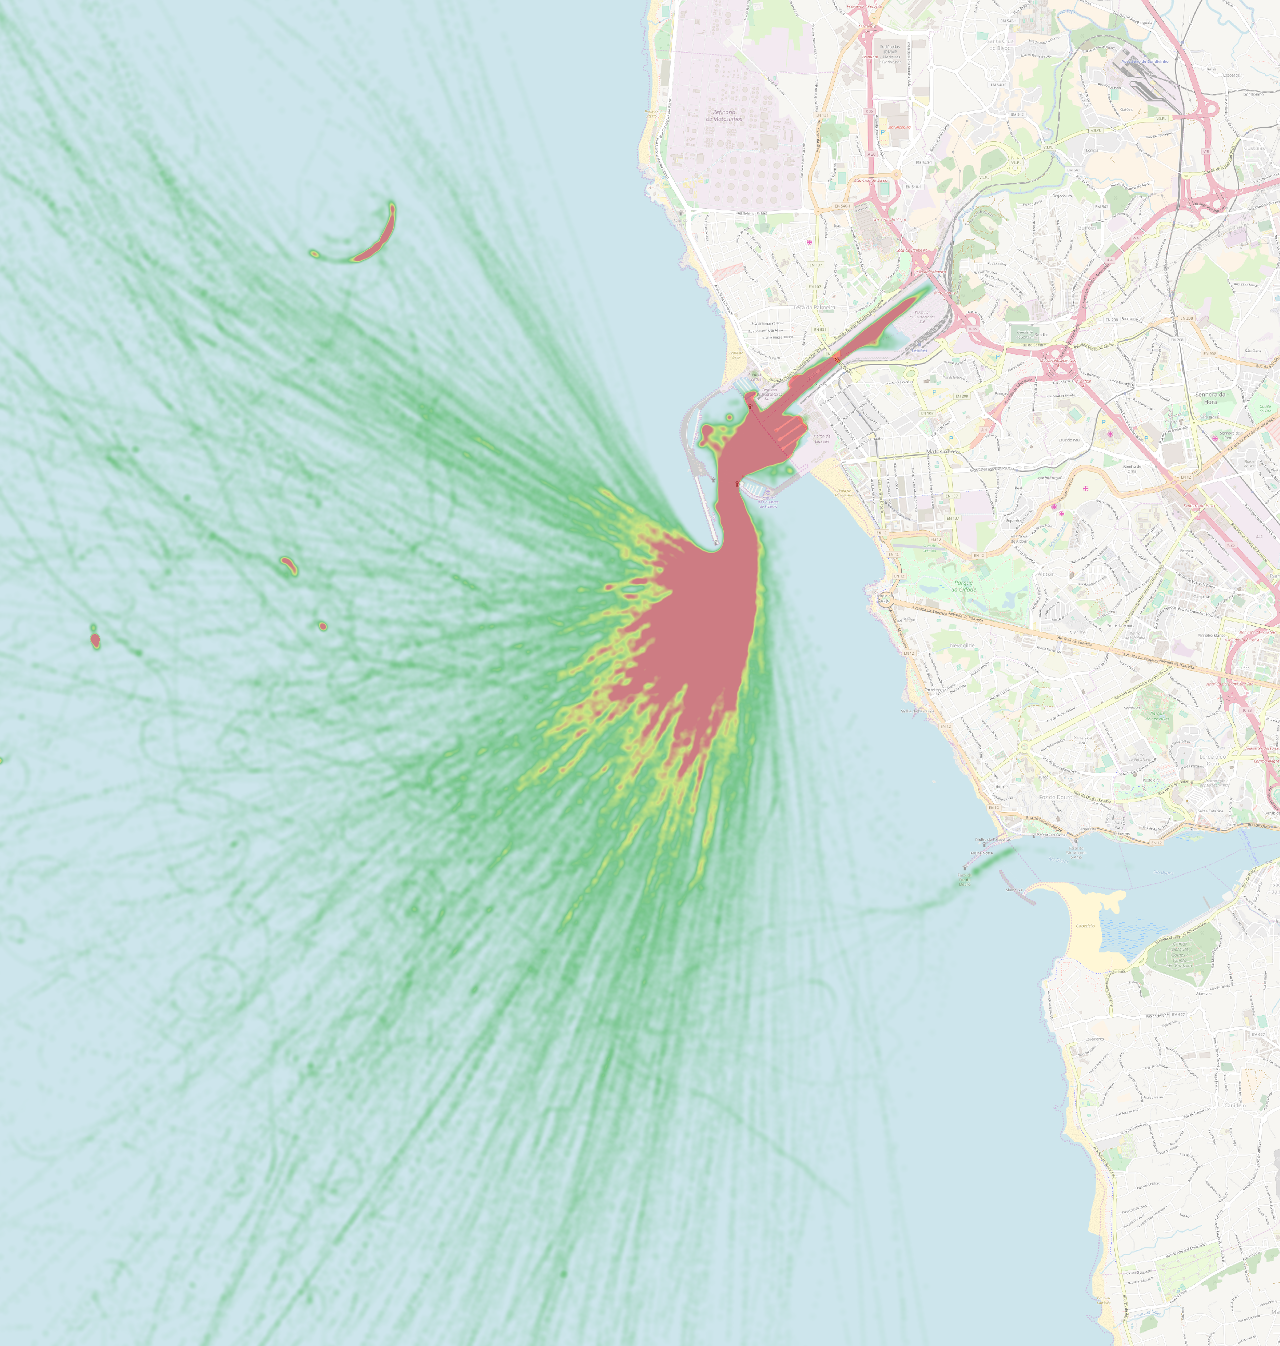 Ship density in and out of Leixões harbor, calculated from AIS data